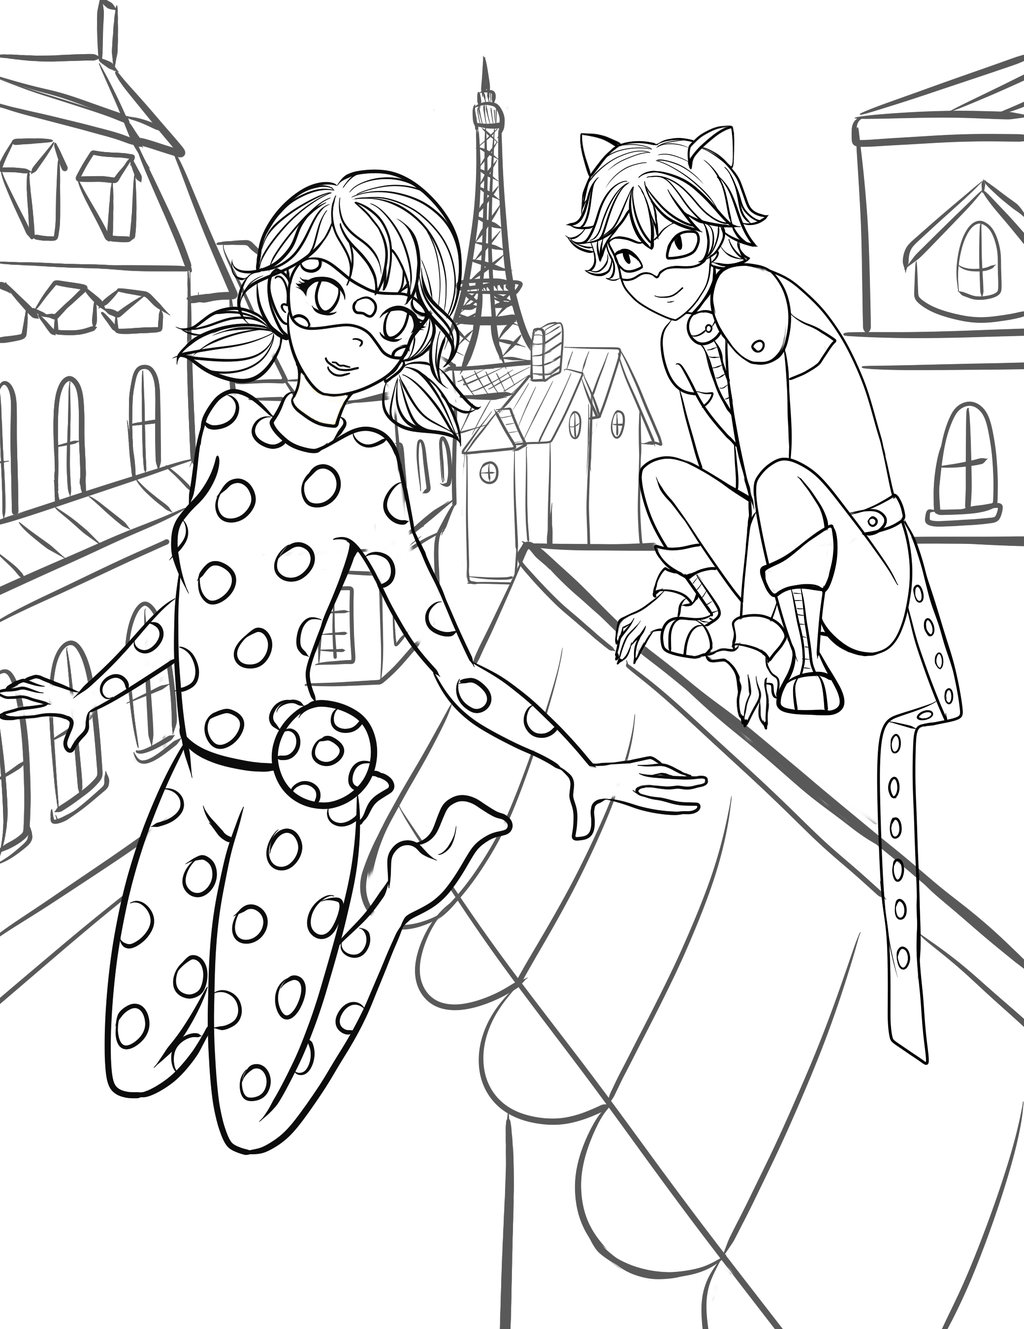 ladybug-and-cat-noir-coloring-pages-to-download-and-print-for-free